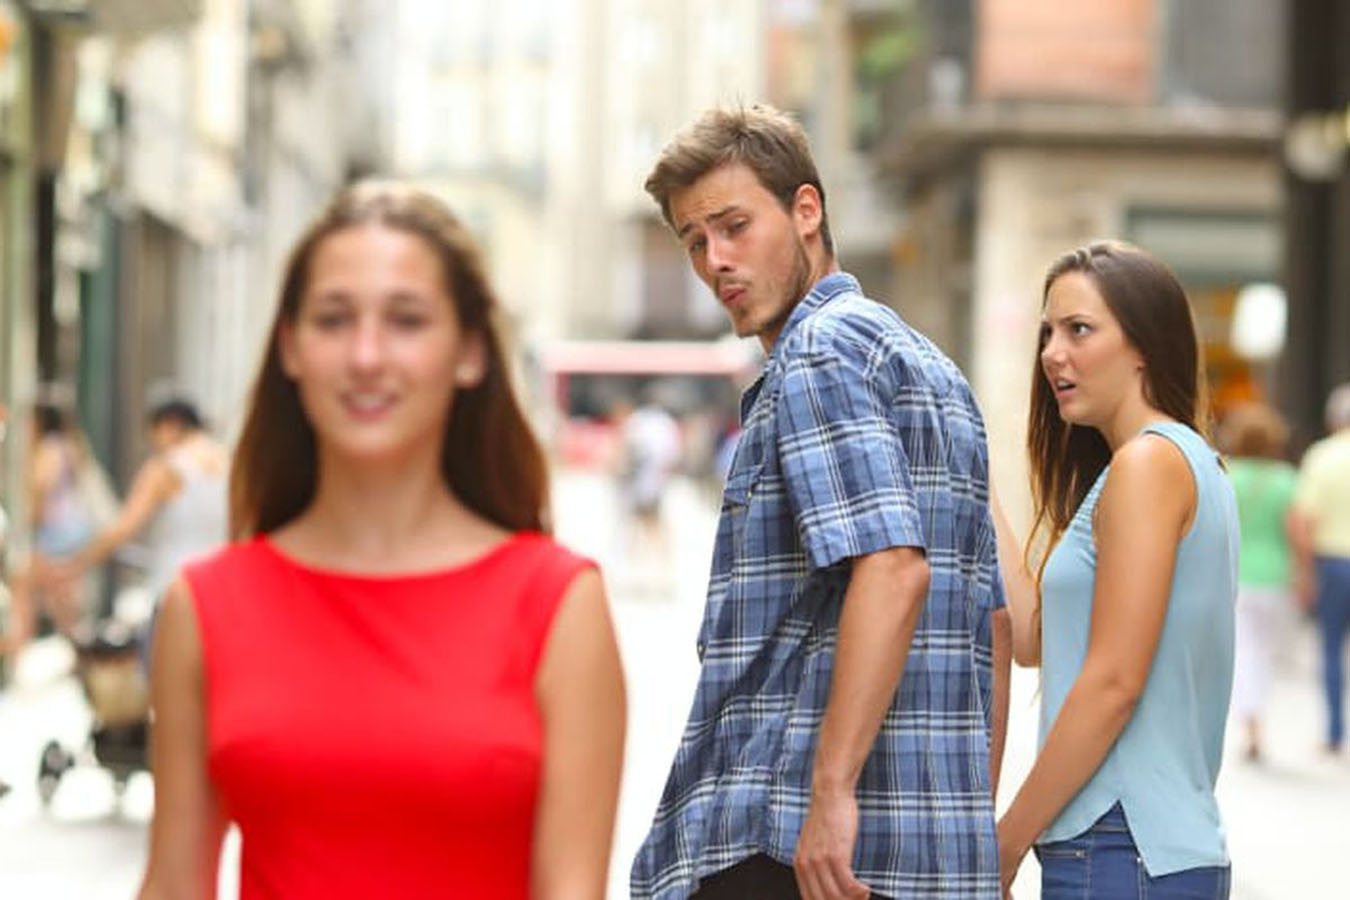 Empty template for the widely popular “Distracted Boyfriend” meme.